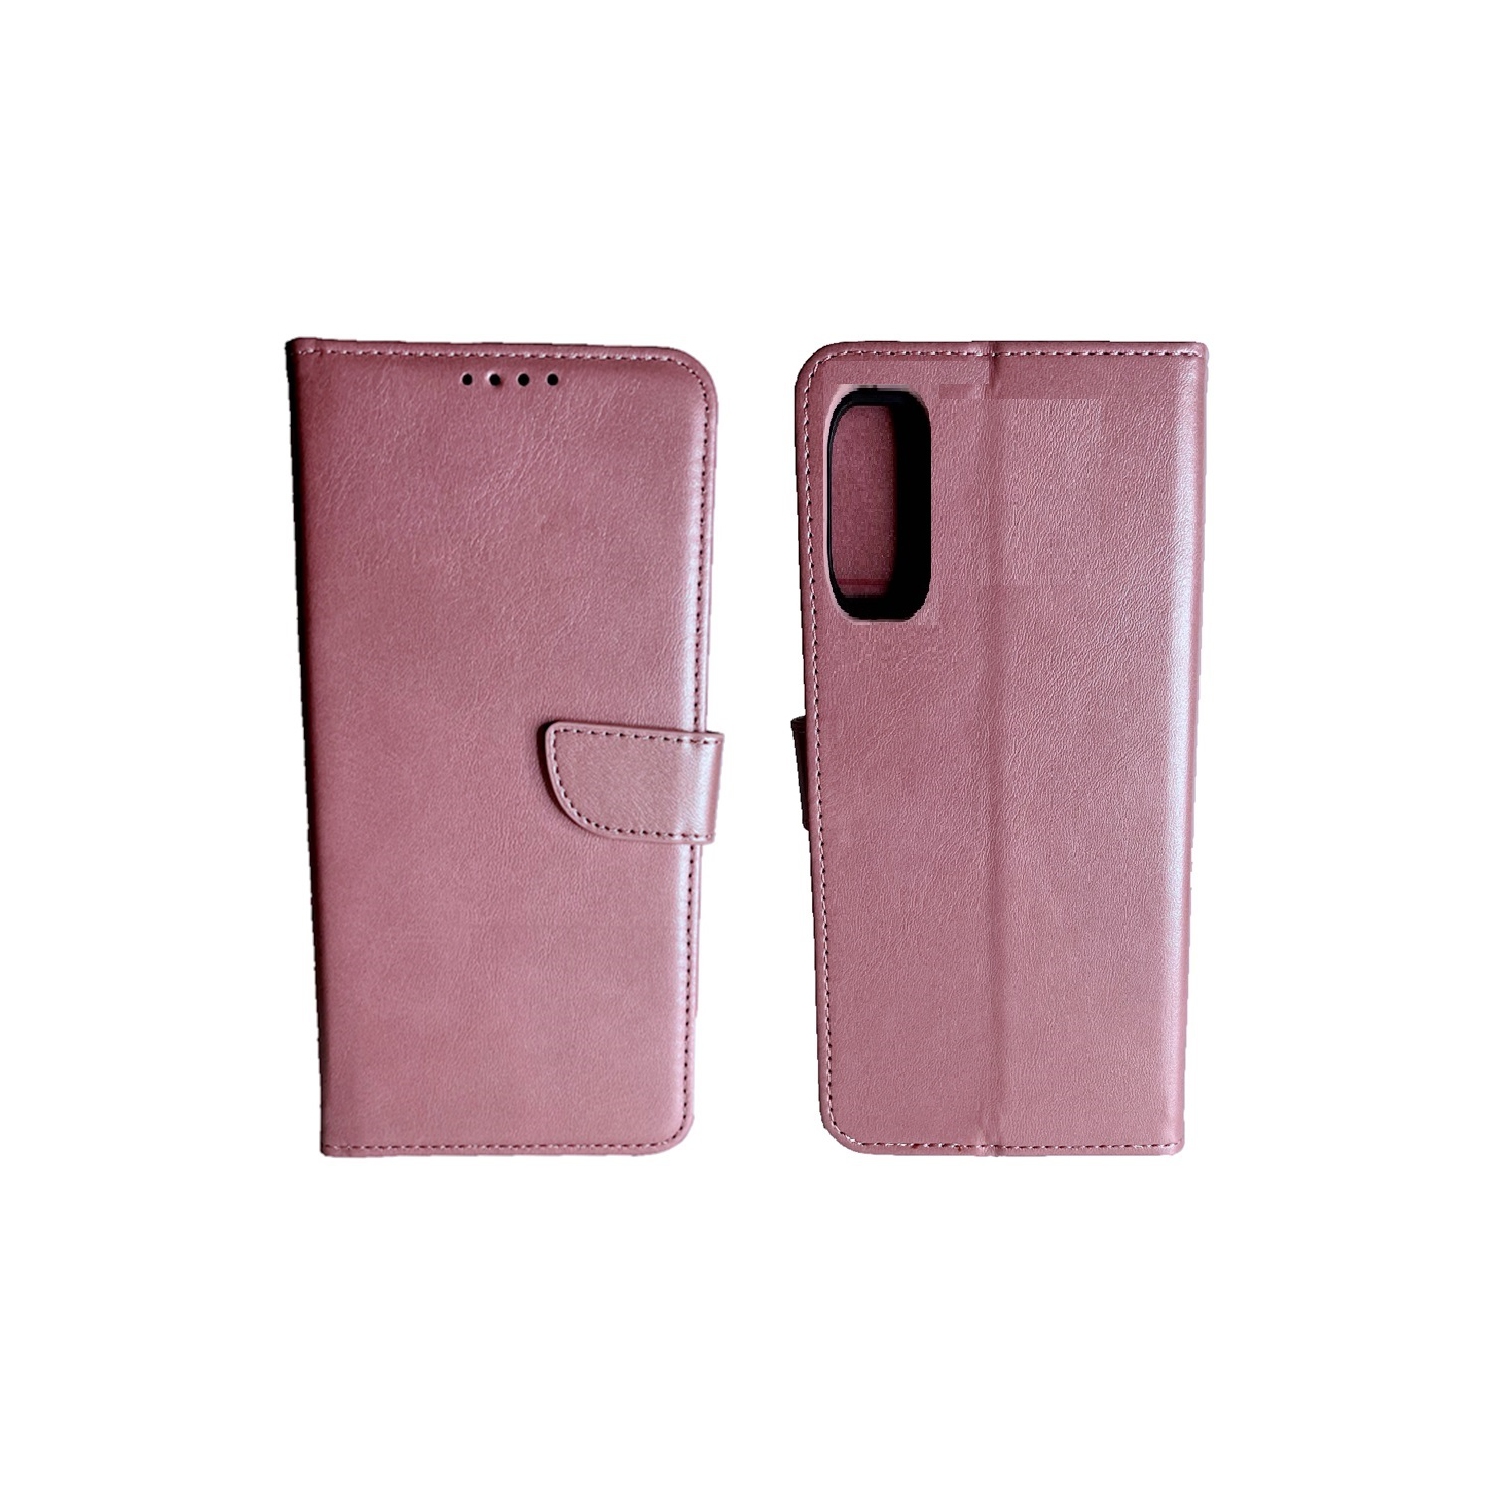 TopSave Leather Folio Flip Wallet w/Magnetic Clip Card Slot Holder Case For TCL 20S, Rose Gold